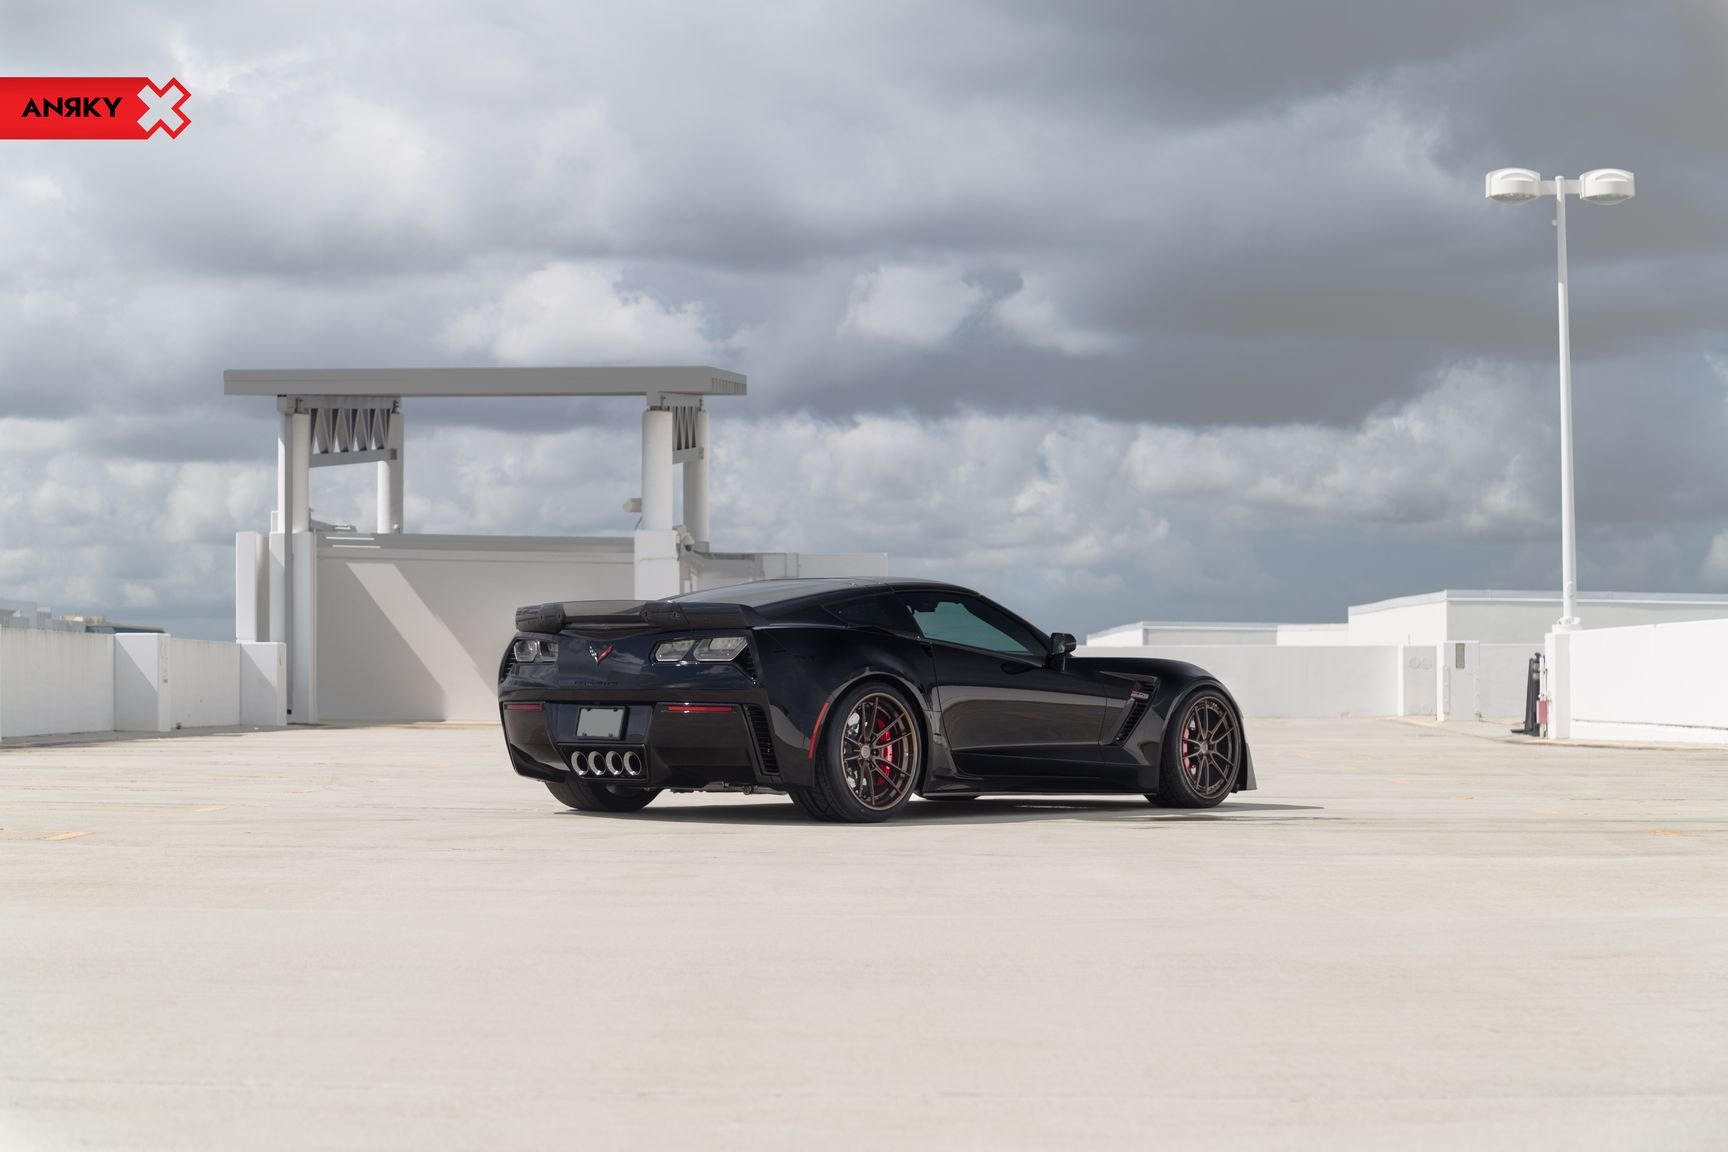 Black Chevy Corvette with Custom Style Rear Spoiler - Photo by Anrky Wheels